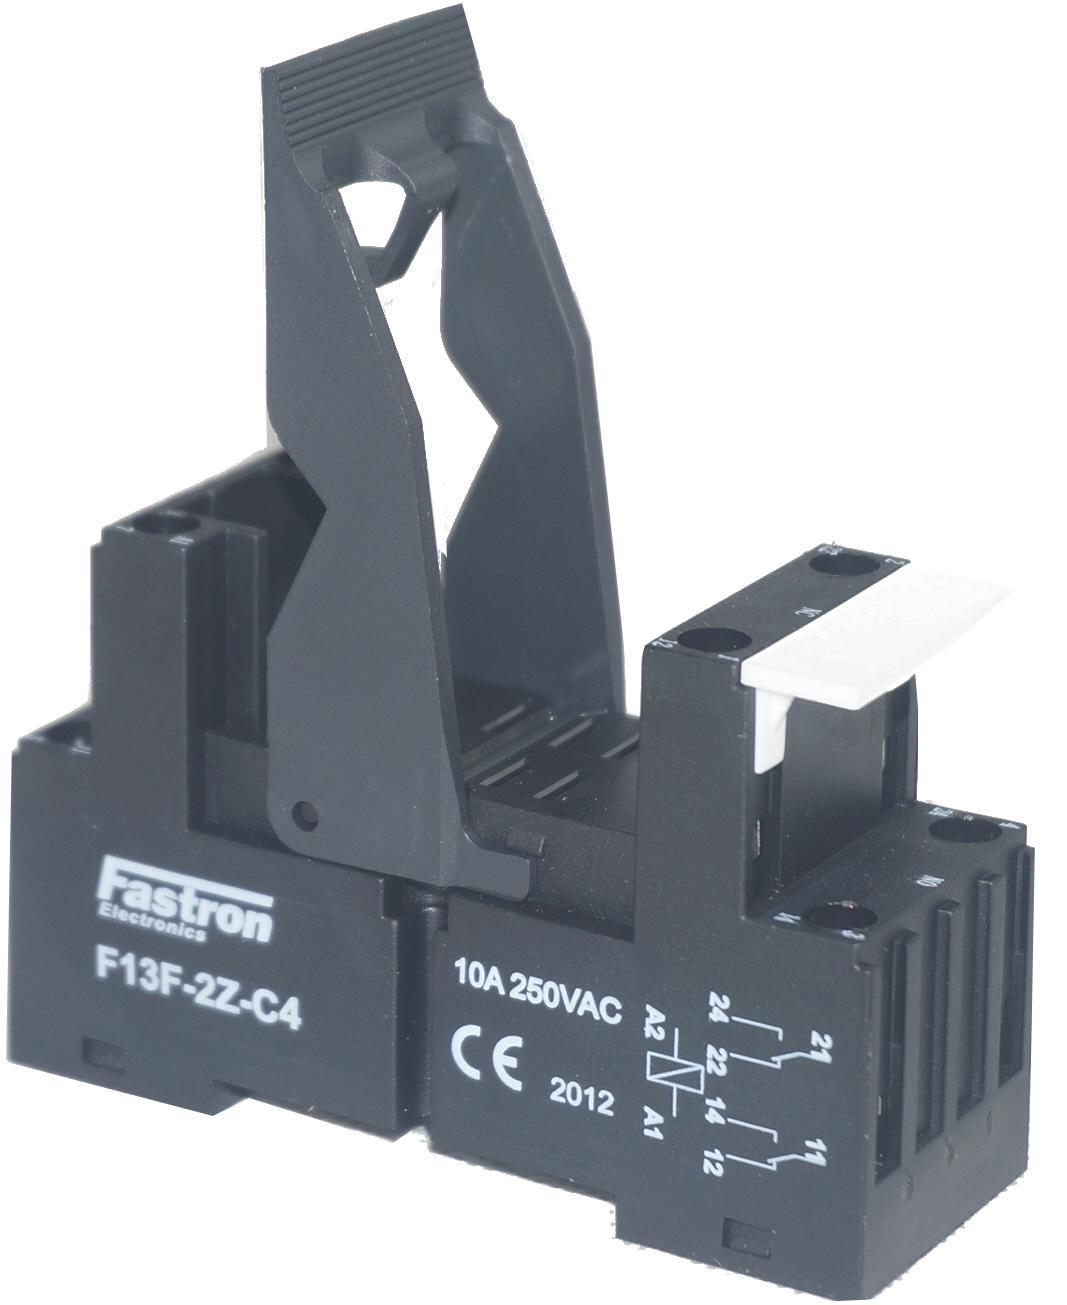 F13F-2Z-C4, 8 Pin Relay Socket, Rated for 2 x 12 Amp, 250VAC/30VDC Load, 0-240VAC/0-60VDC Coil-Relay-Fastron Electronics-Fastron Electronics Store